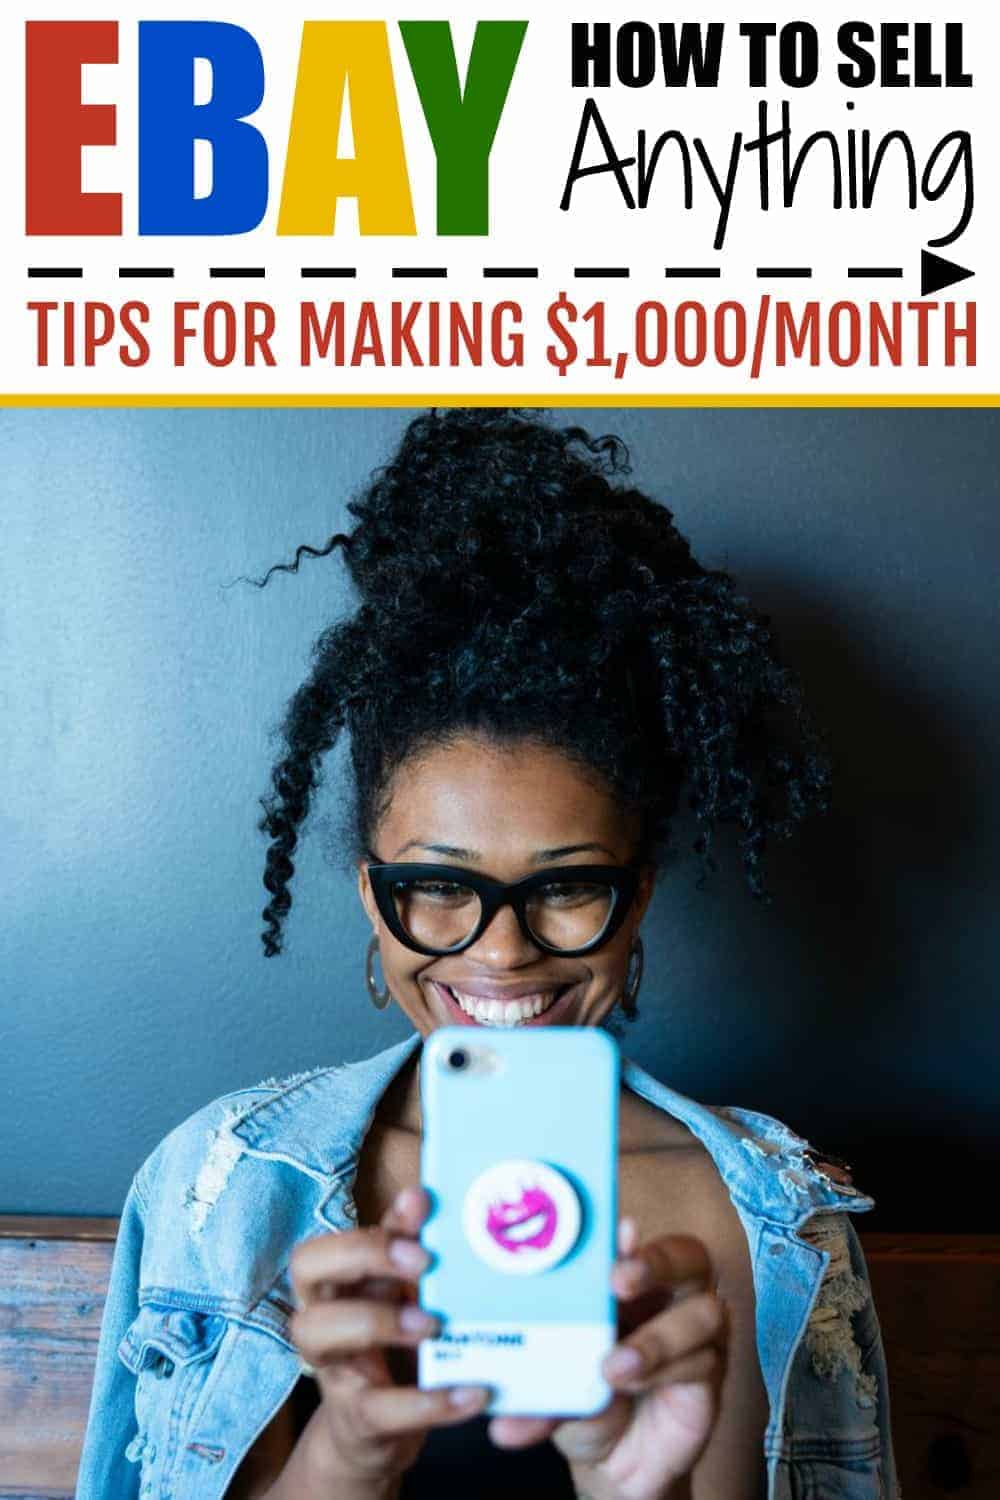 Here's EXACTLY How to Sell on Make a Month!)